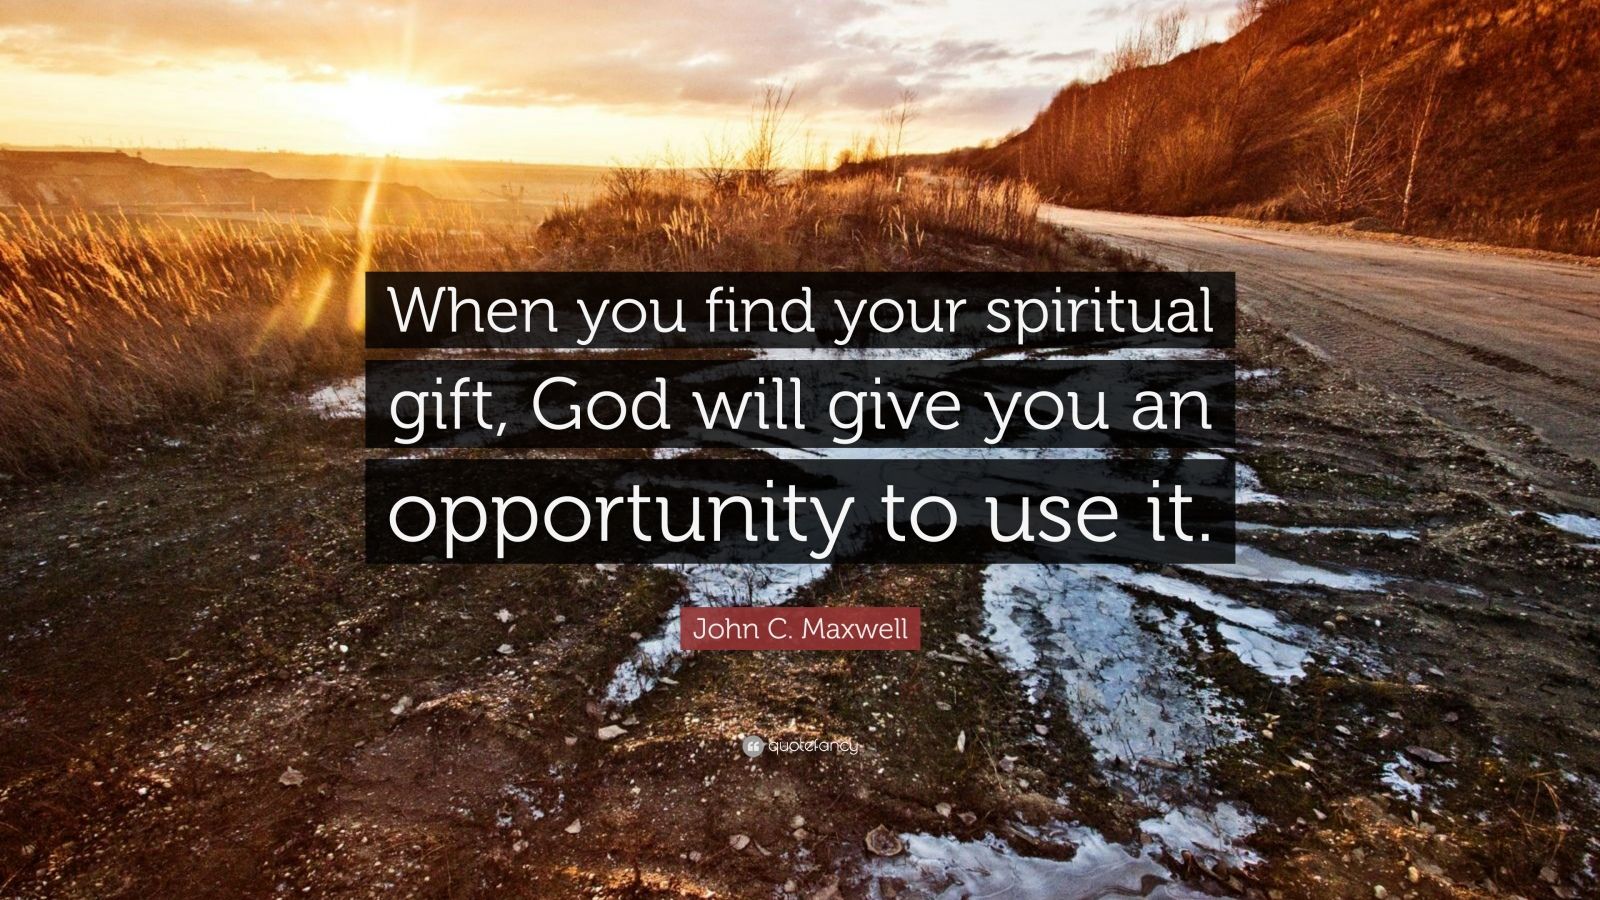 166944 John C Maxwell Quote When you find your spiritual gift God will